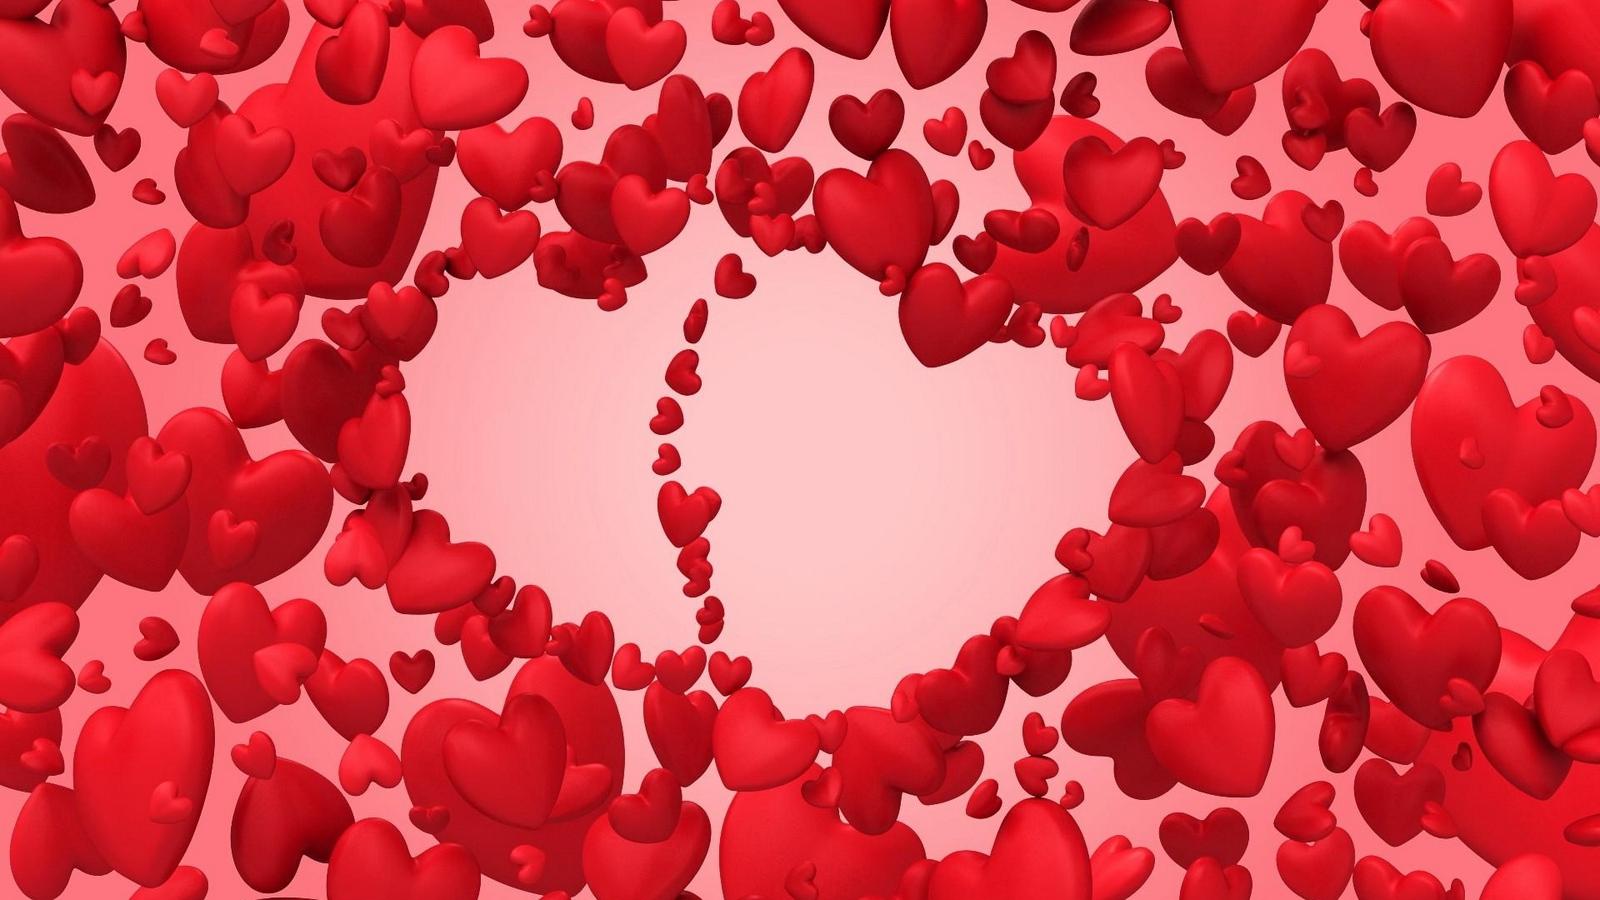 Download wallpaper 1600x900 valentines day, hearts, lots